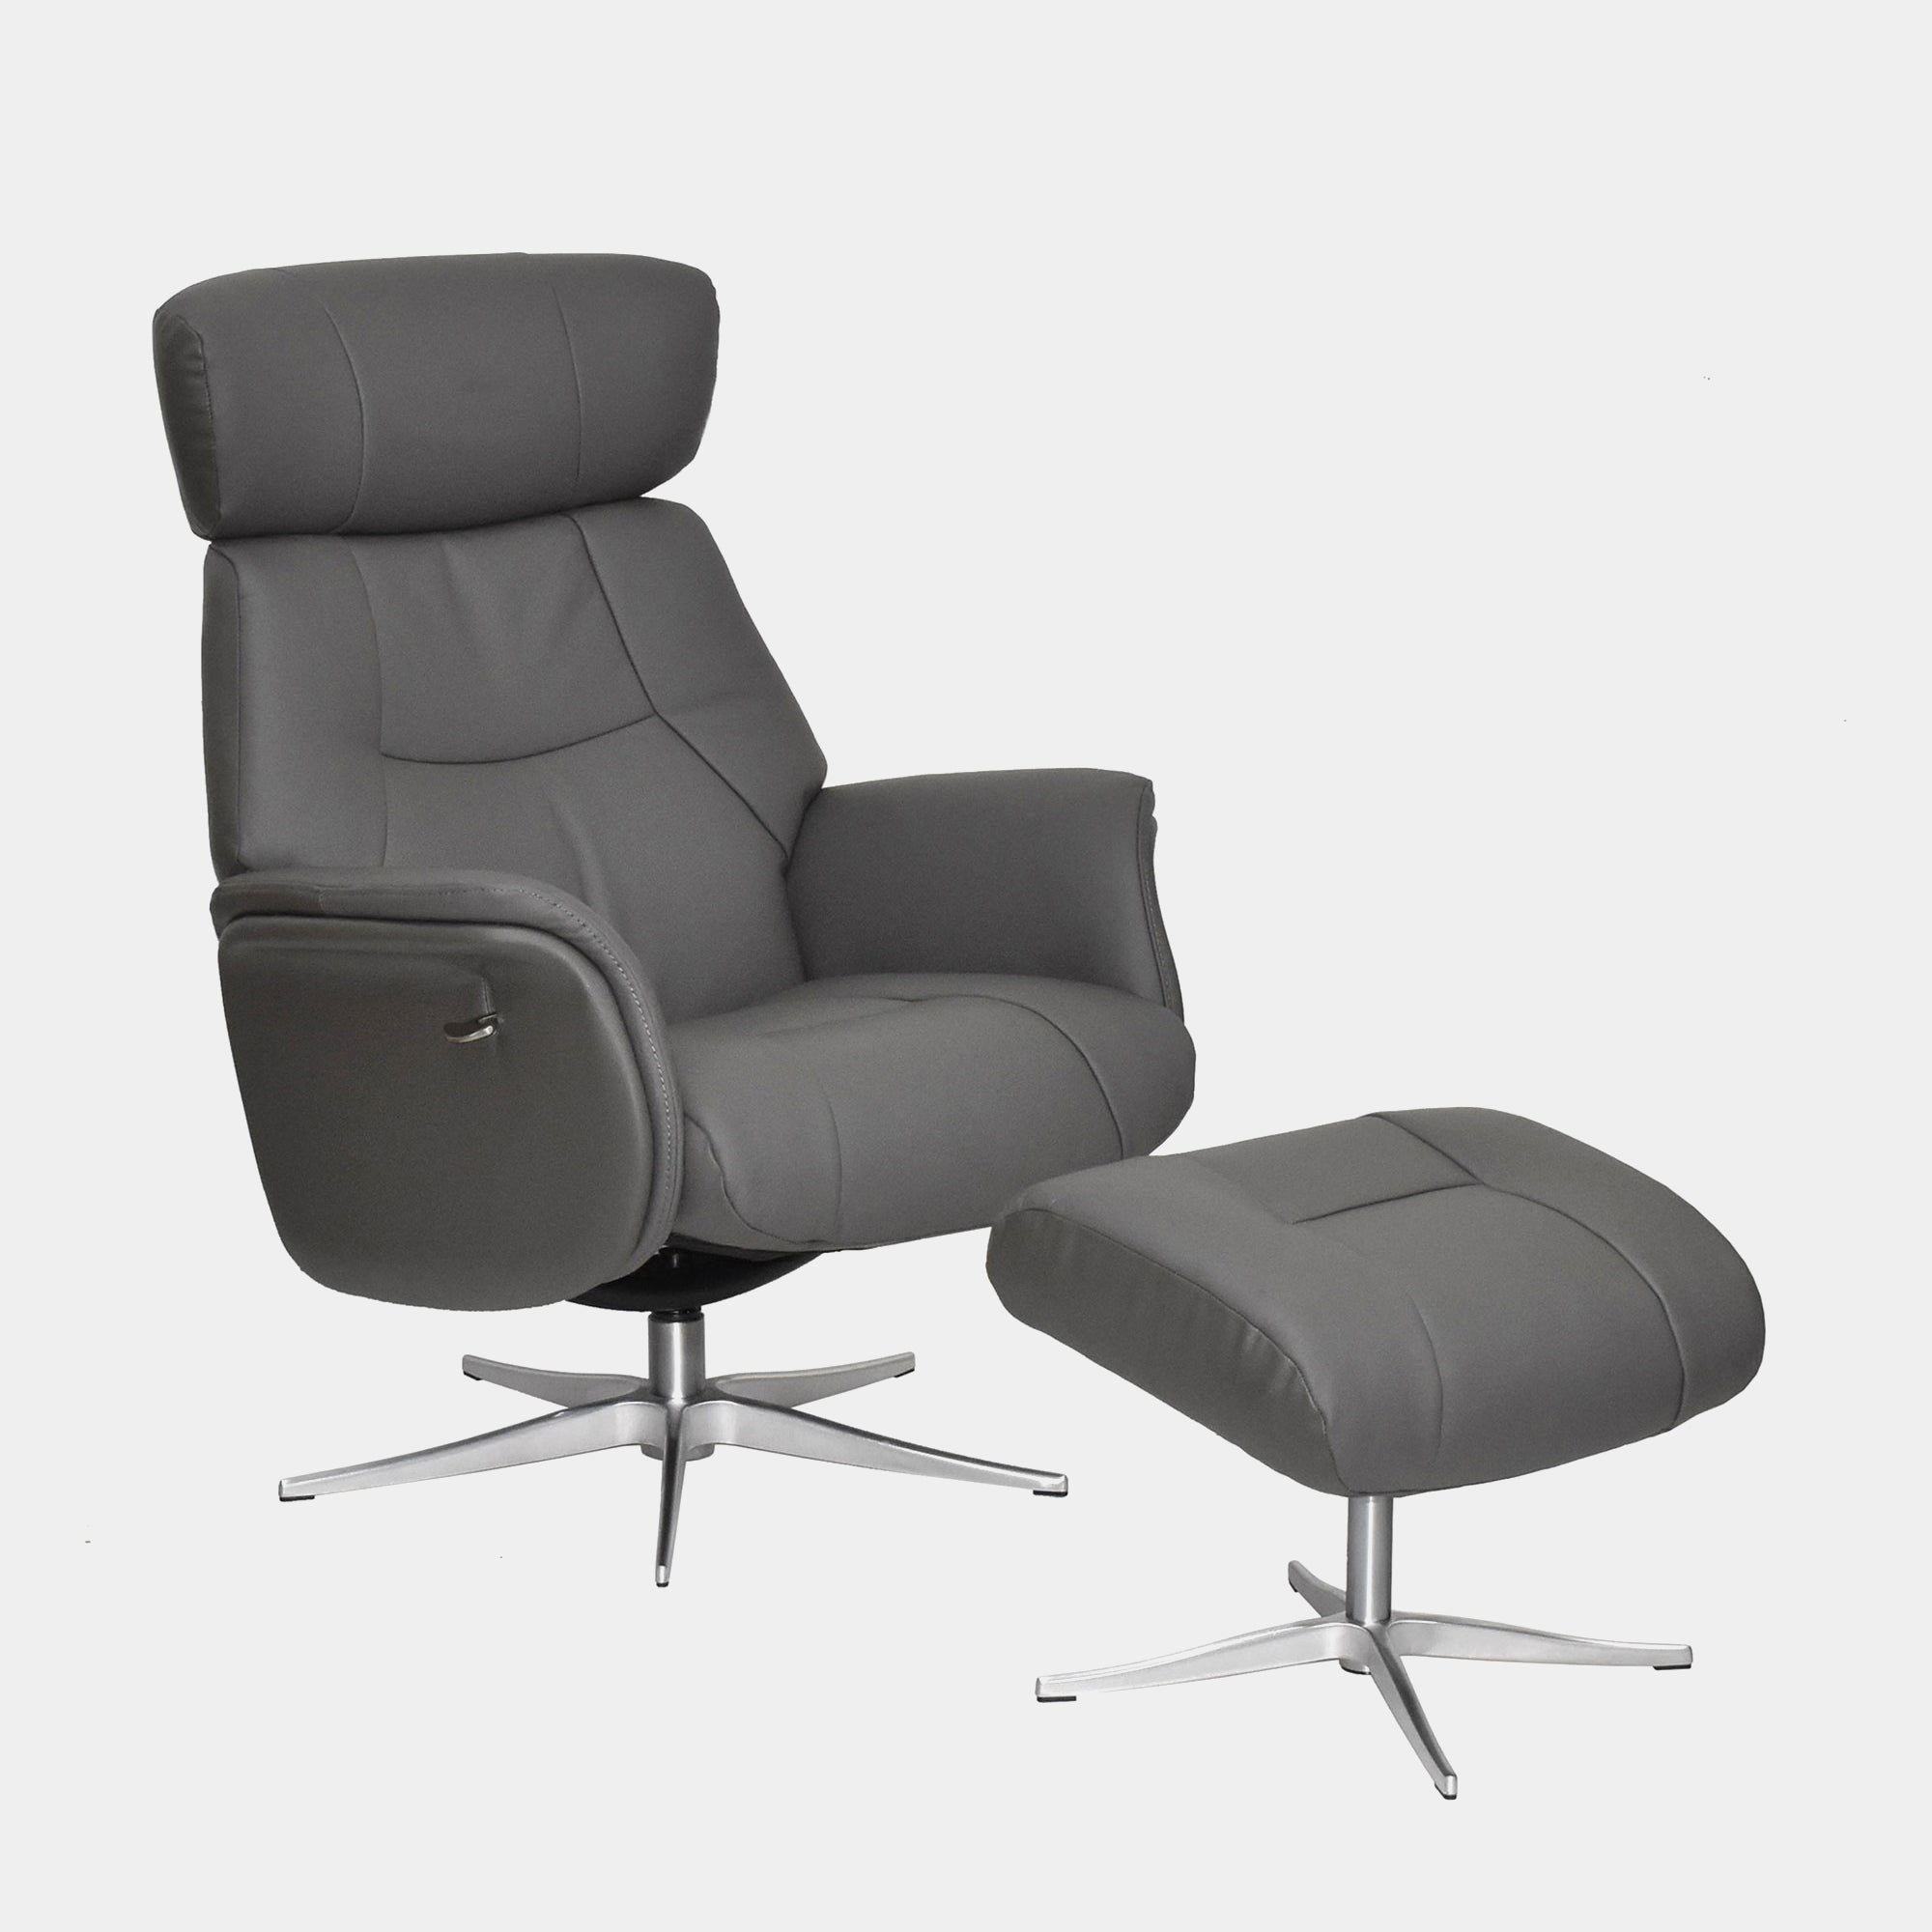 Senator - Swivel Recliner Chair & Footstool In Leather With Chrome Base Match Charcoal